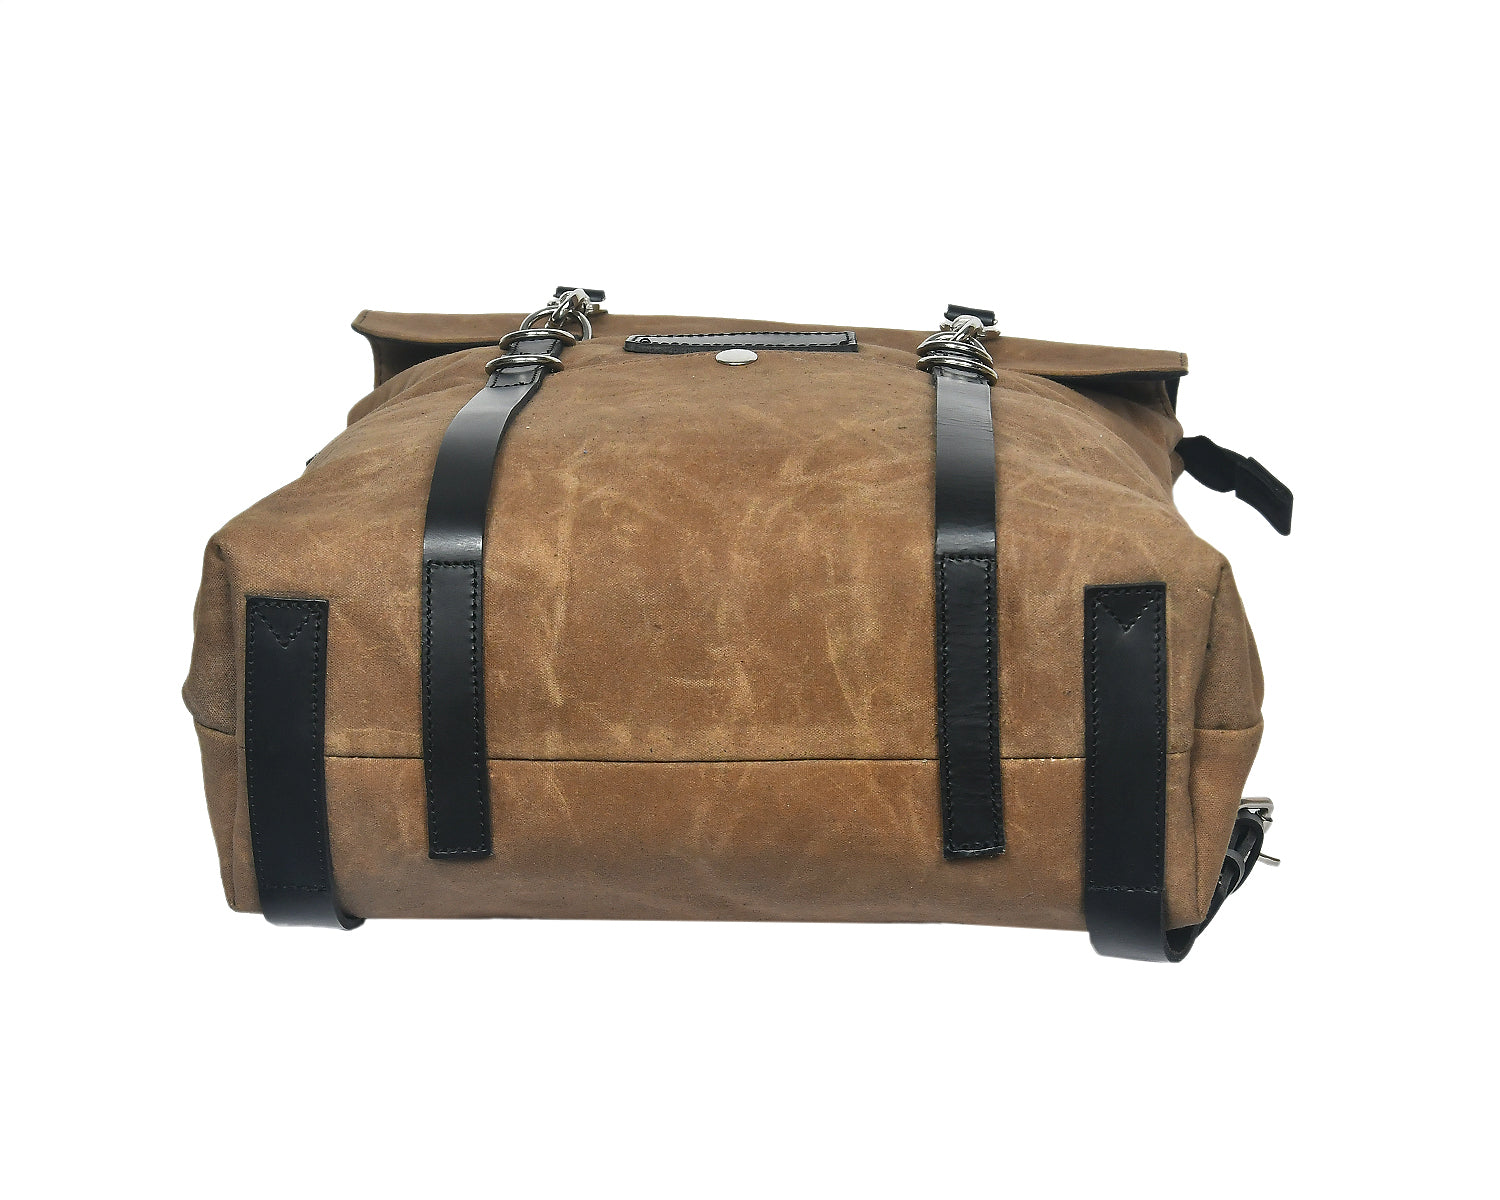 Elegant Brown Canvas and Leather Backpack. - CELTICINDIA